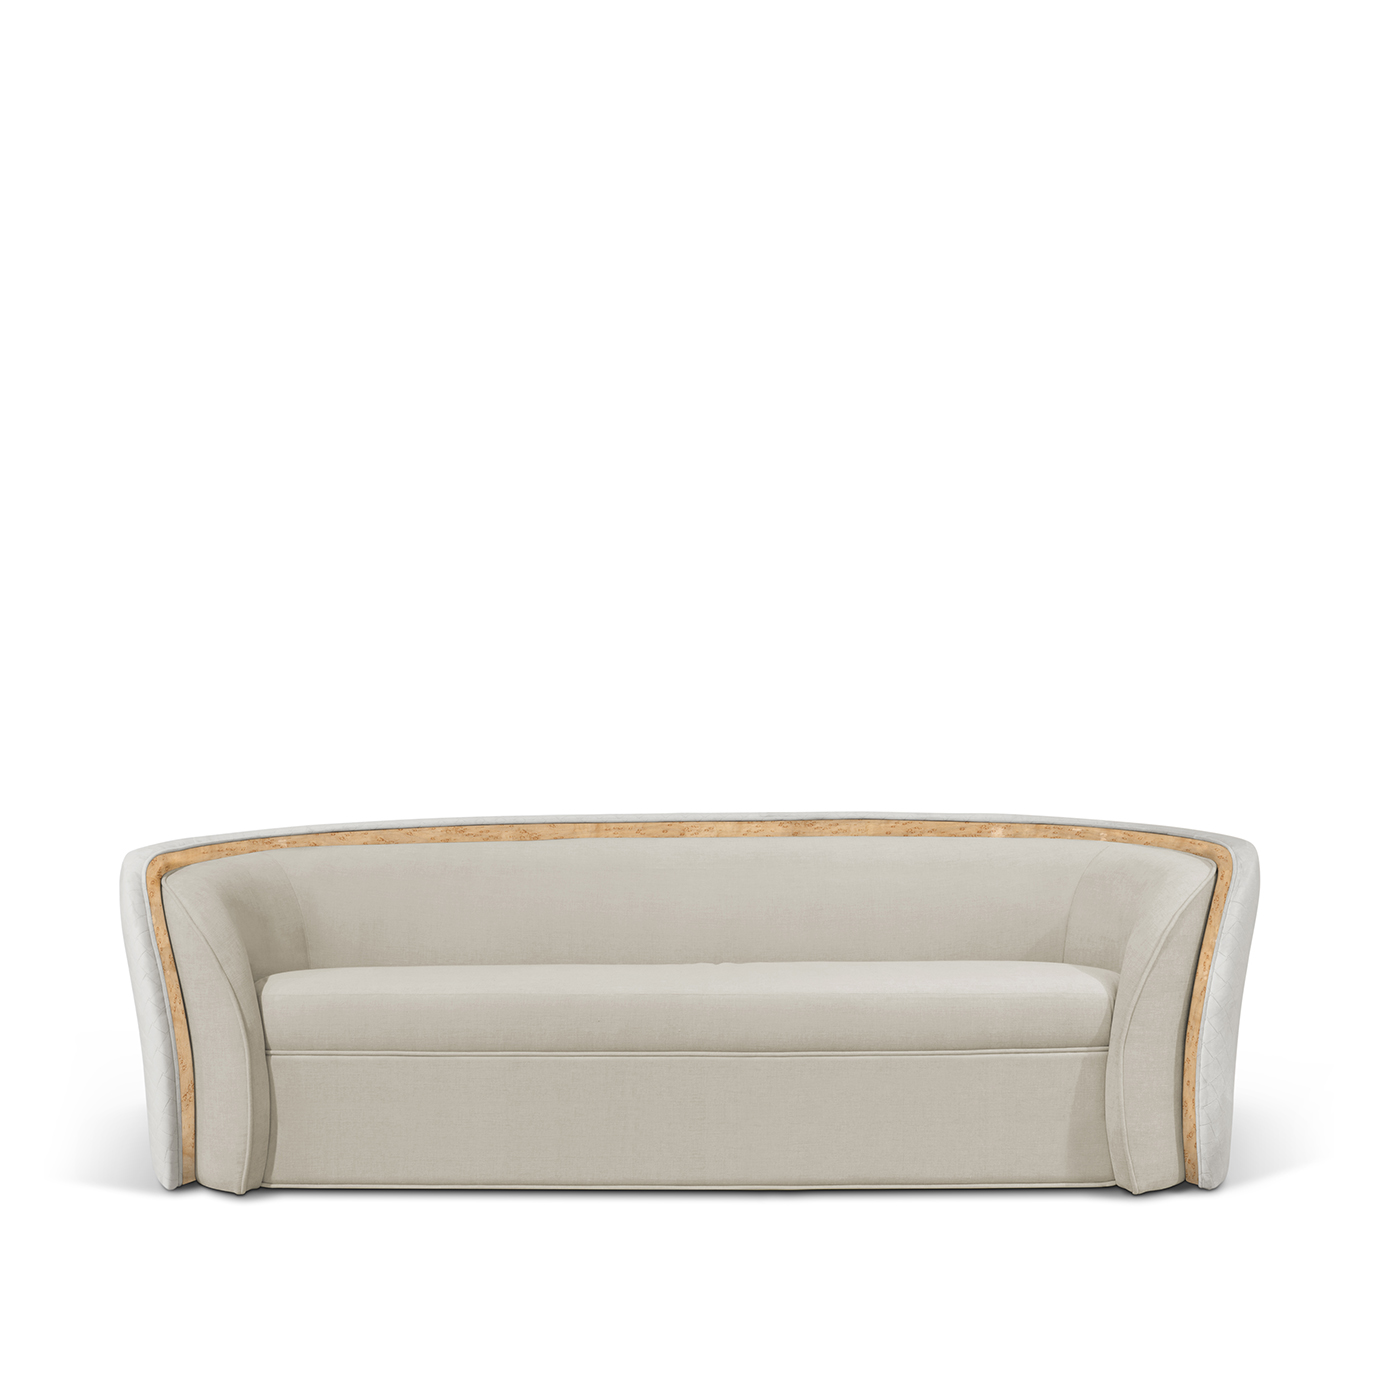 sultana sofa by koket parisian eclectic style couch curved